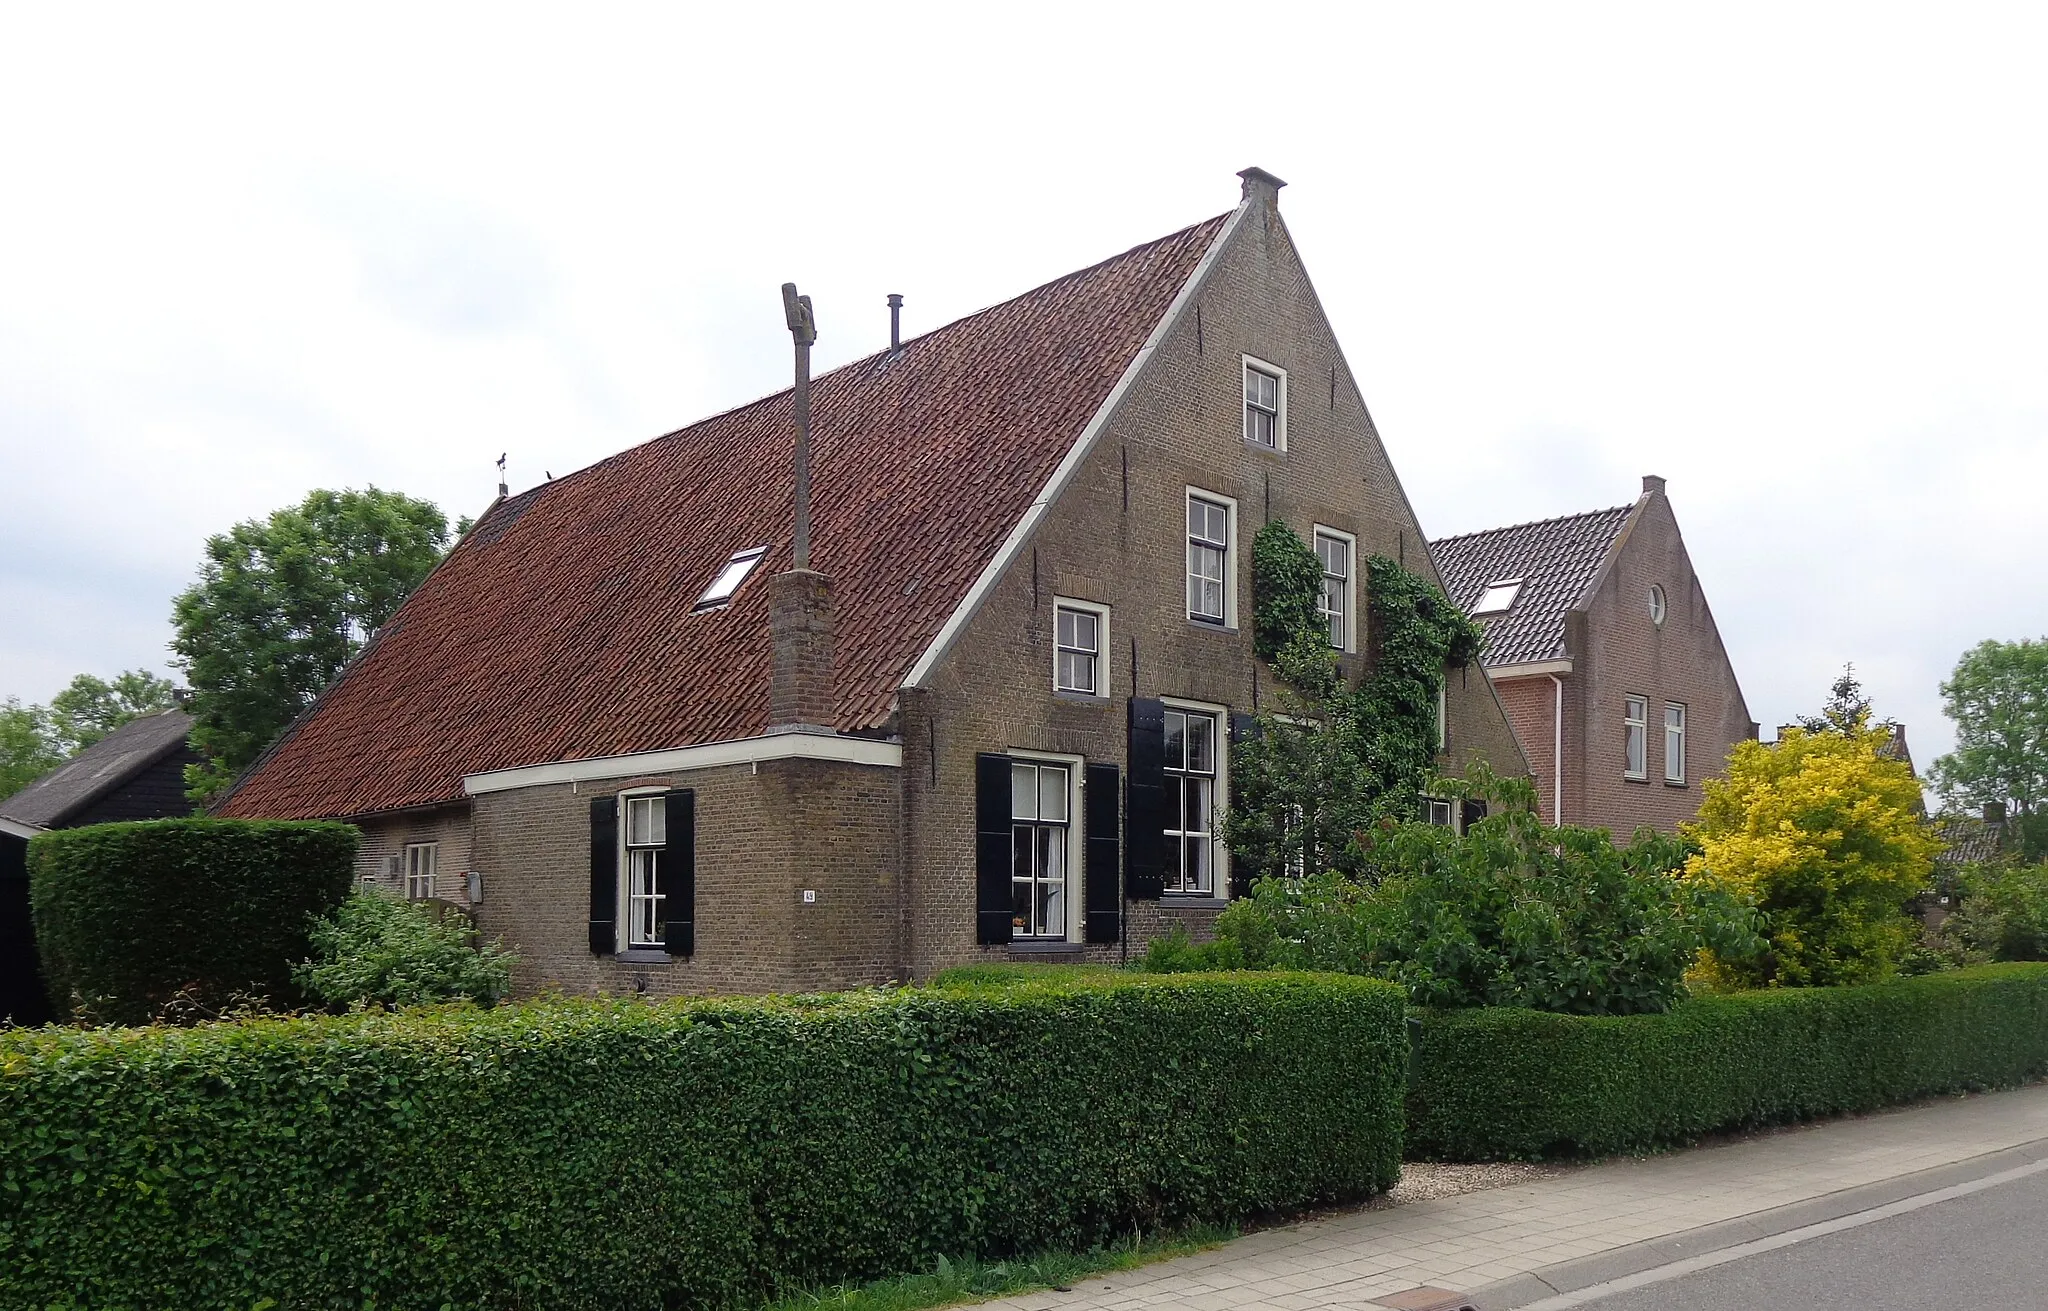 Photo showing: This is an image of rijksmonument number 9636